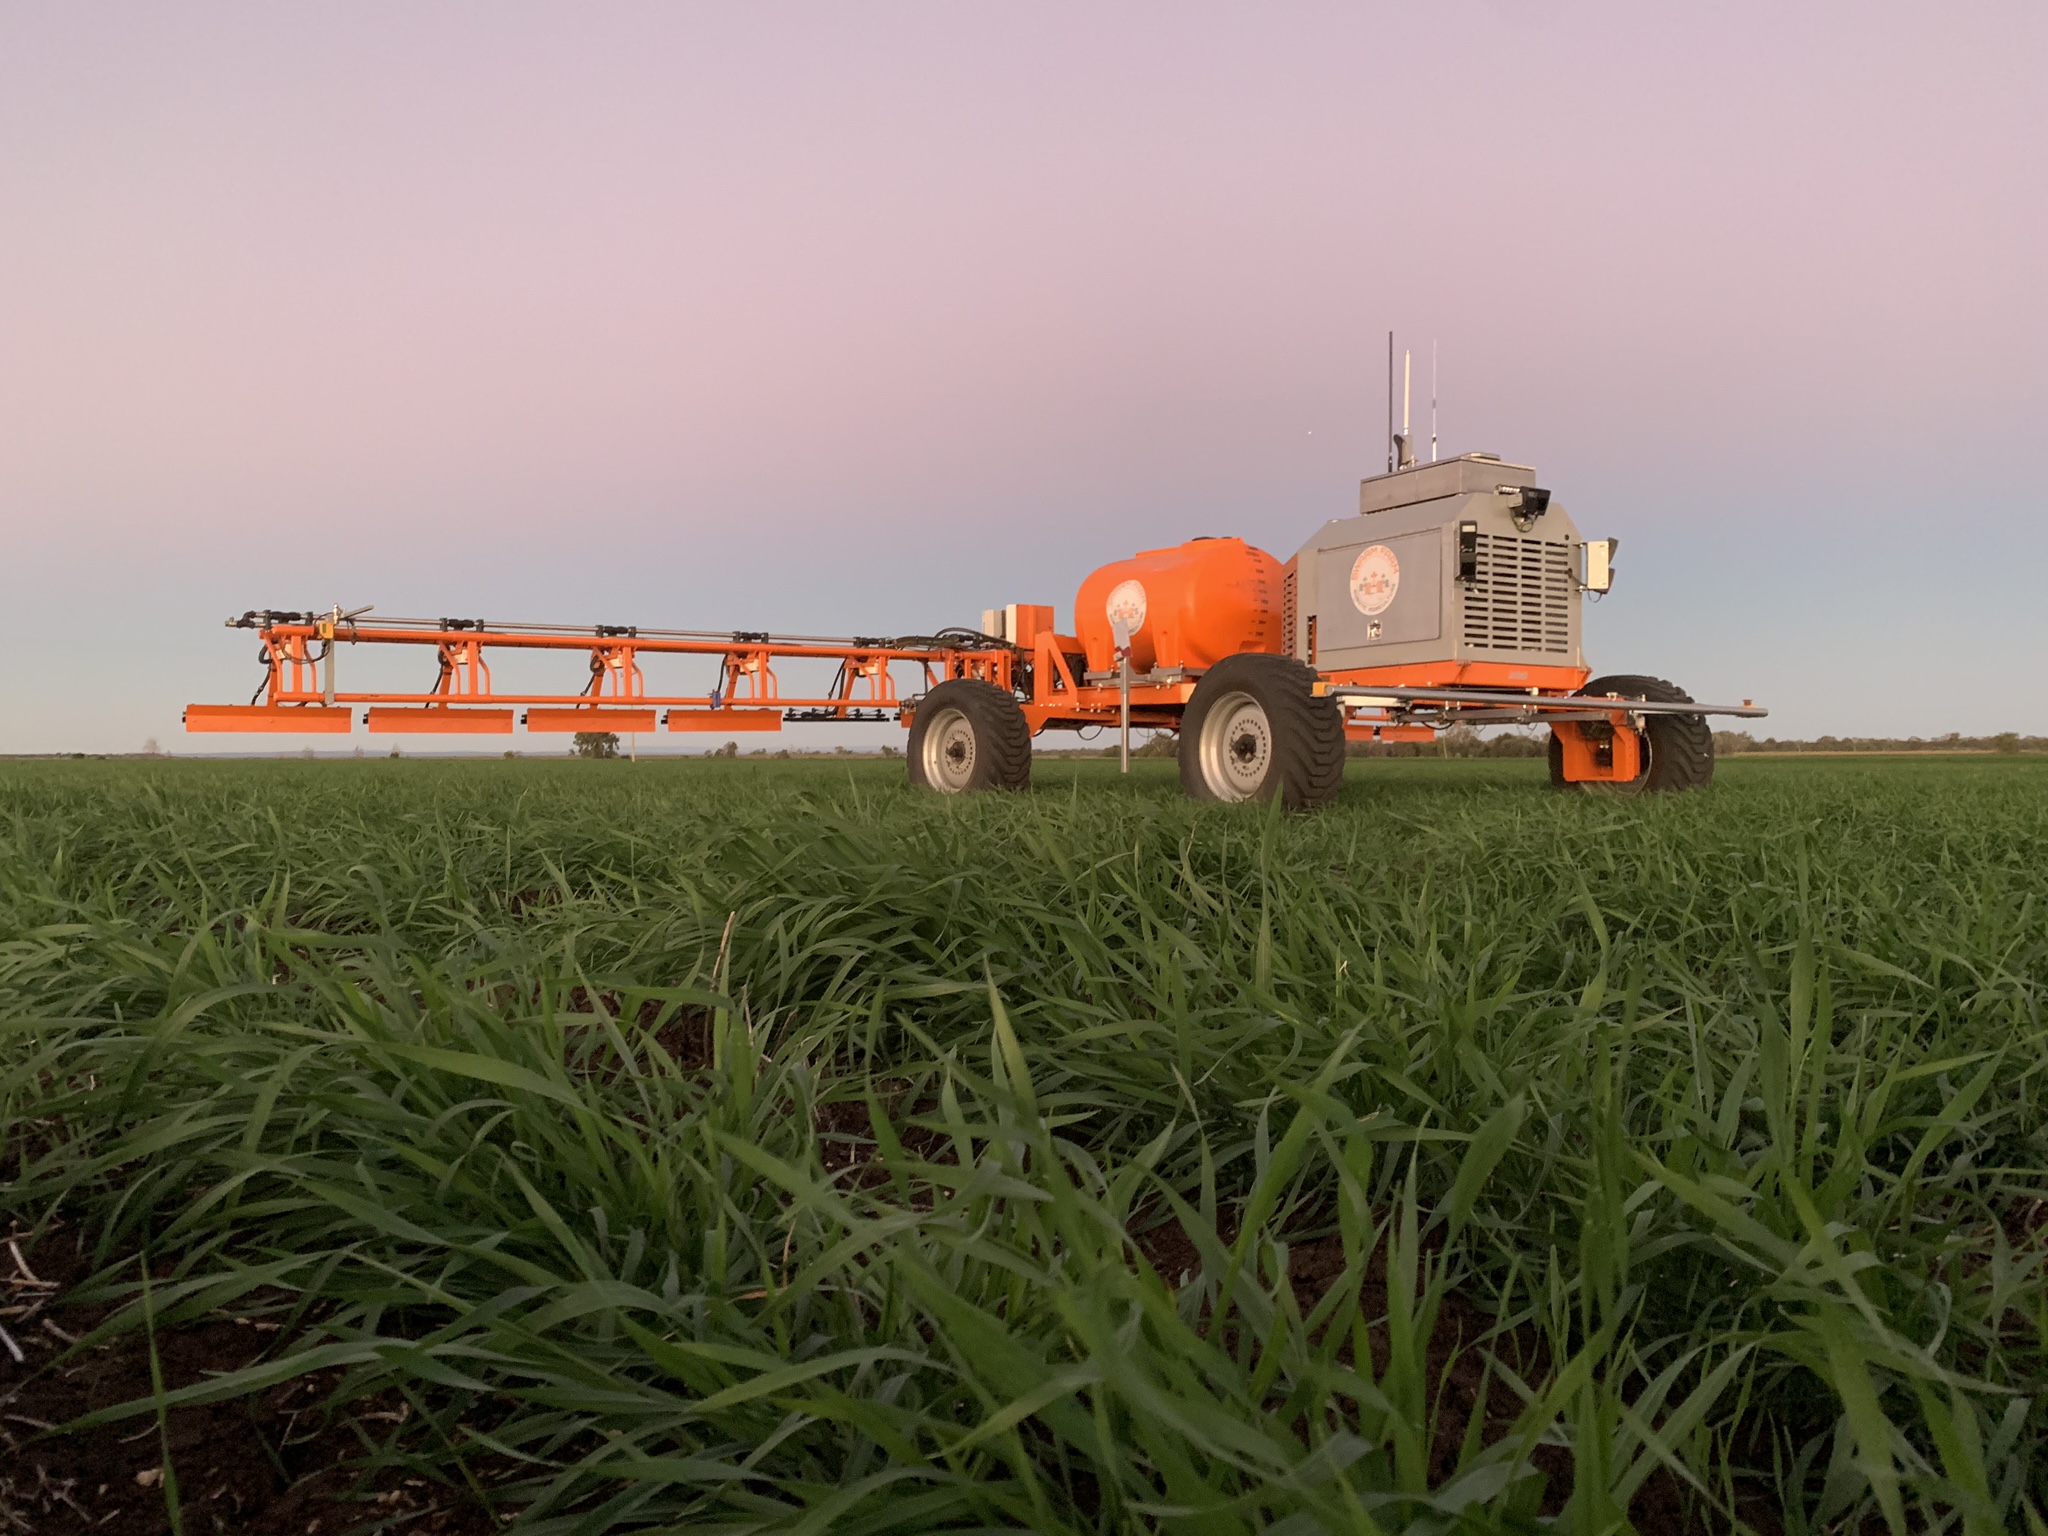 A SwarmFarm Robot in a paddock of young wheat